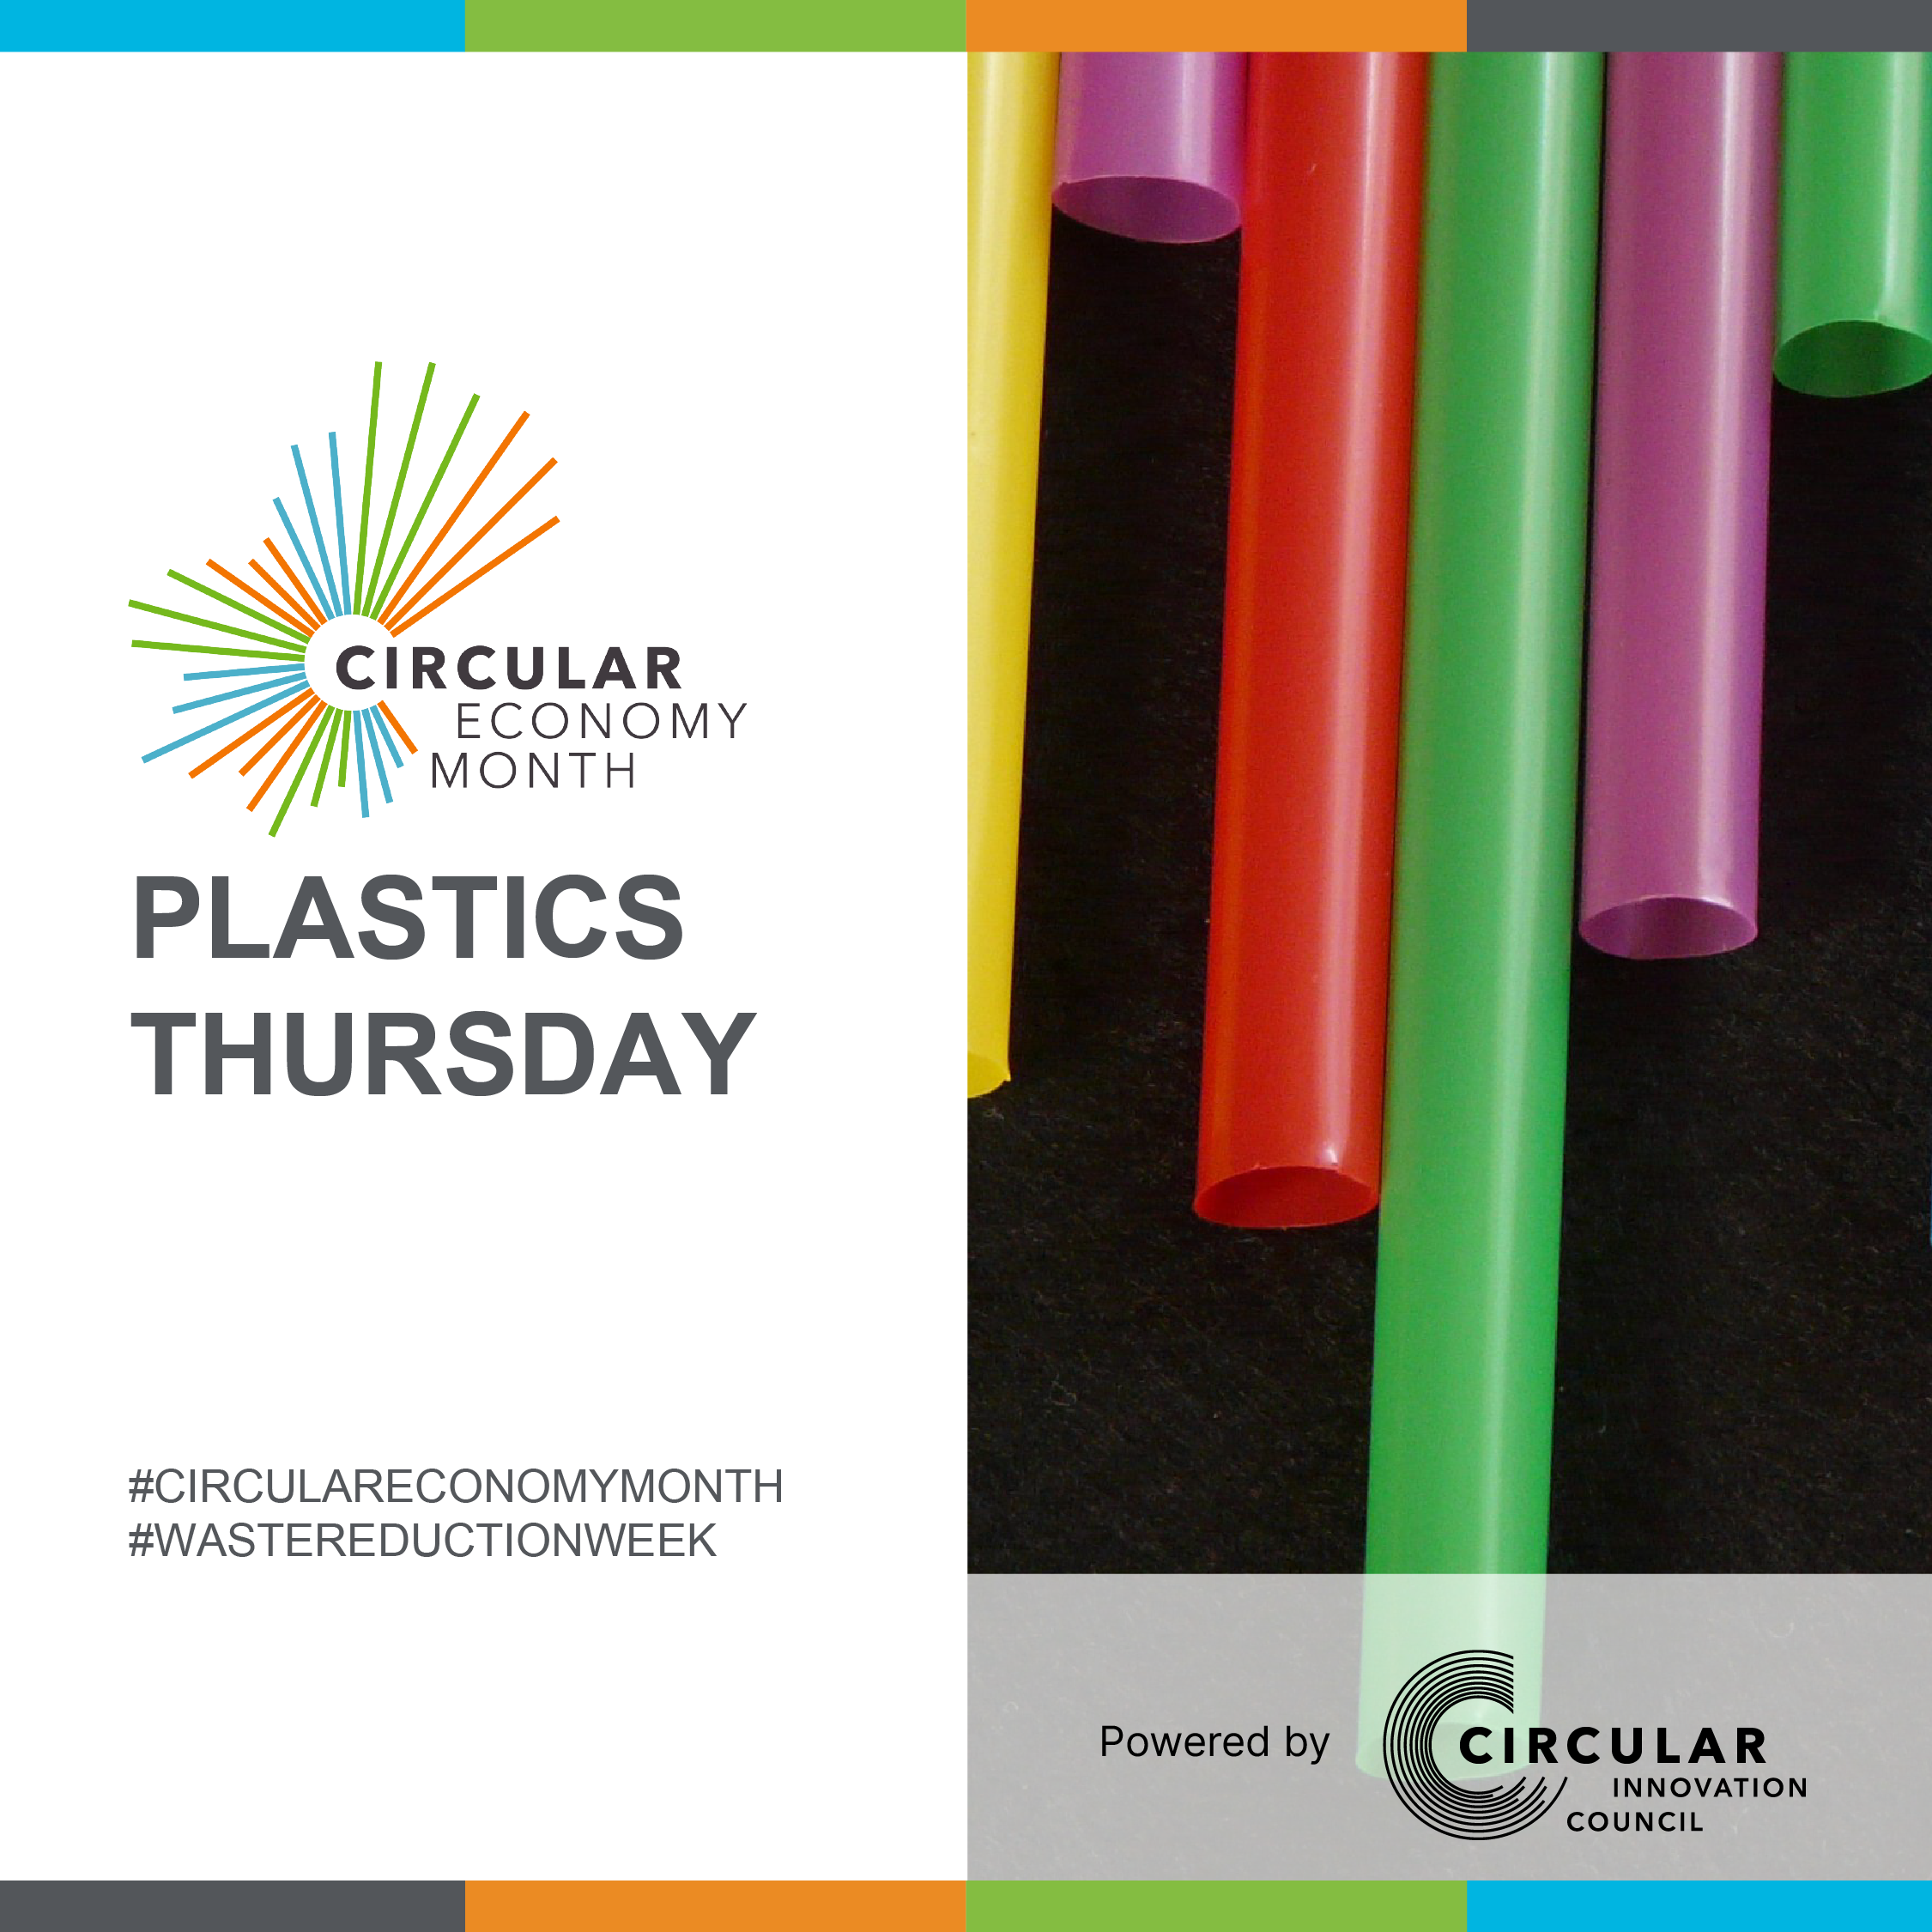 Crushed plastic beverage containers. Plastics Thursday. Circular Economy Month, powered by Circular Innovation Council. #CircularEconomyMonth #WasteReductionWeek.